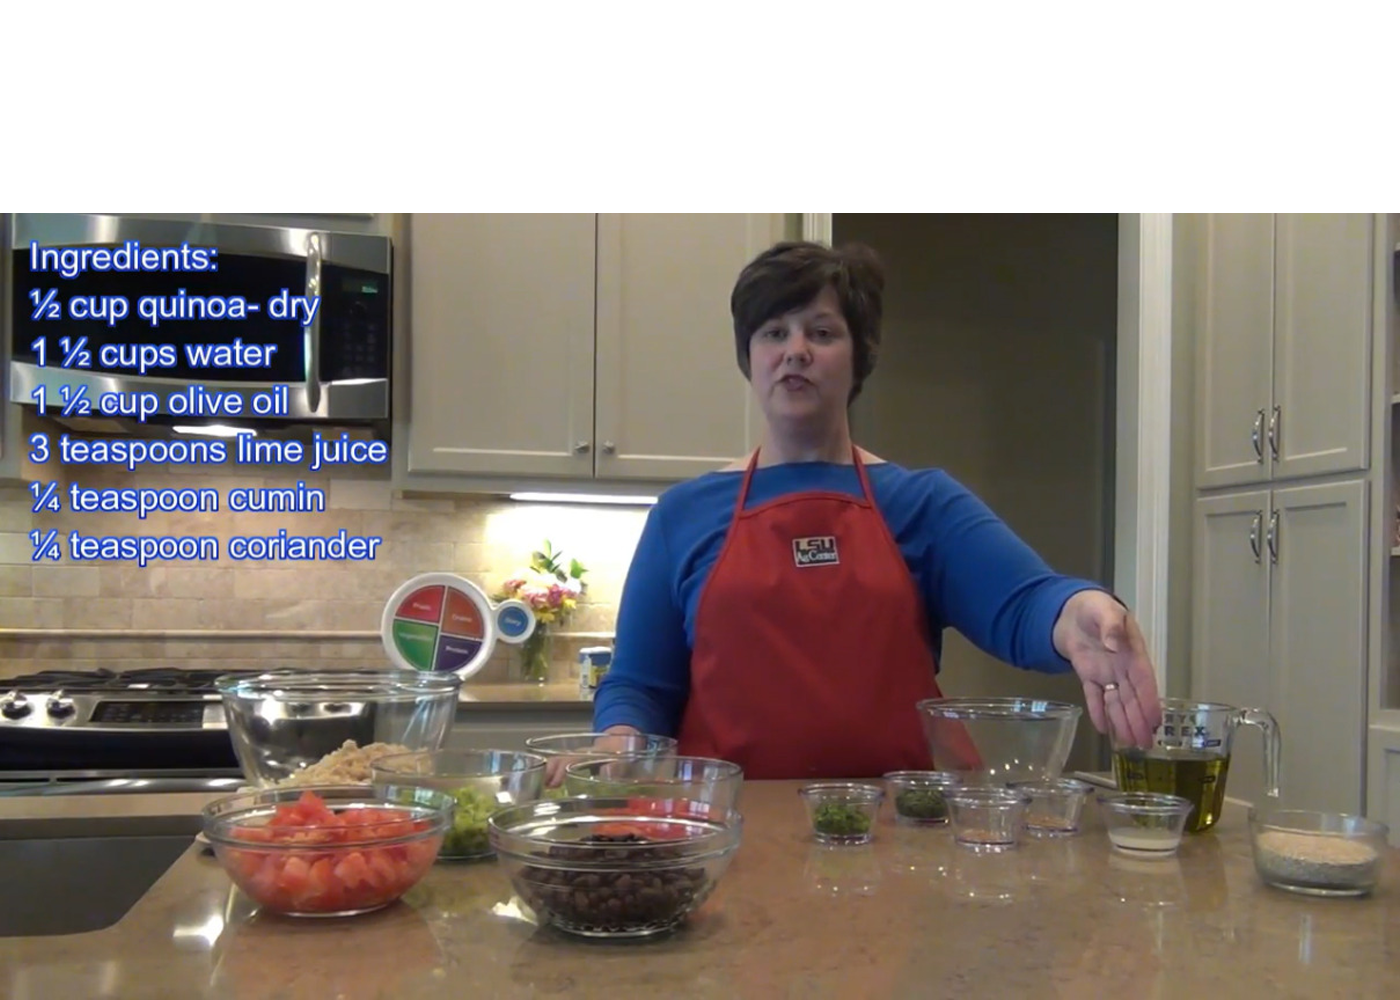 Ingredient List for recipe with a woman giving a cooking demonstration